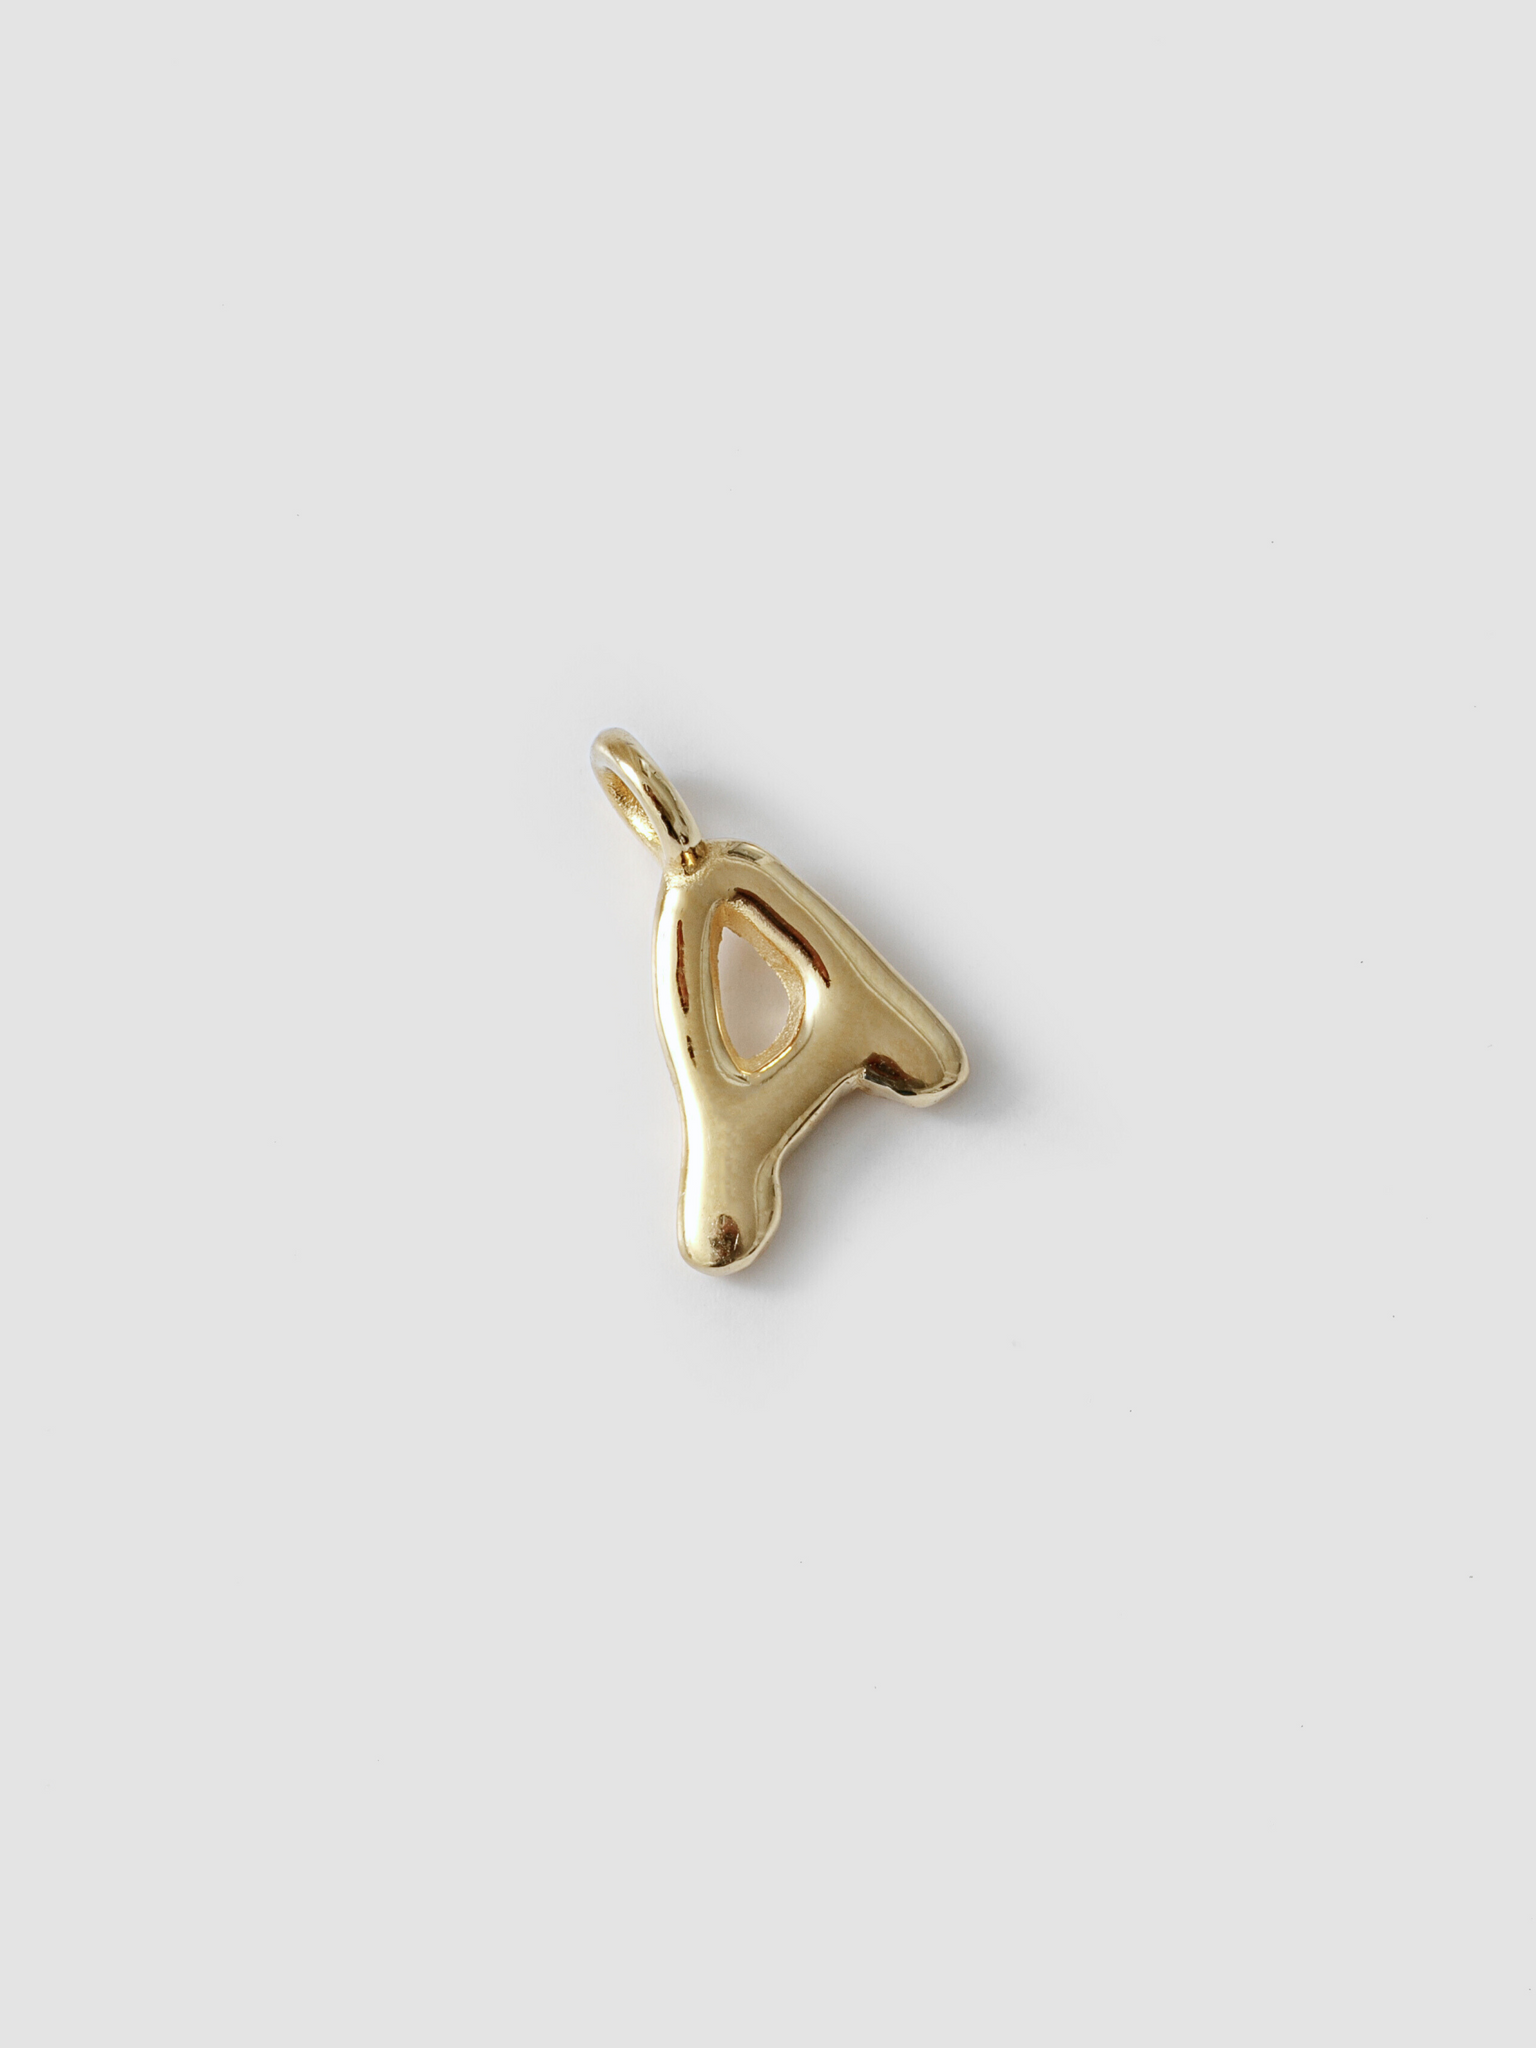 Alphabet Charm in 14k Solid Gold